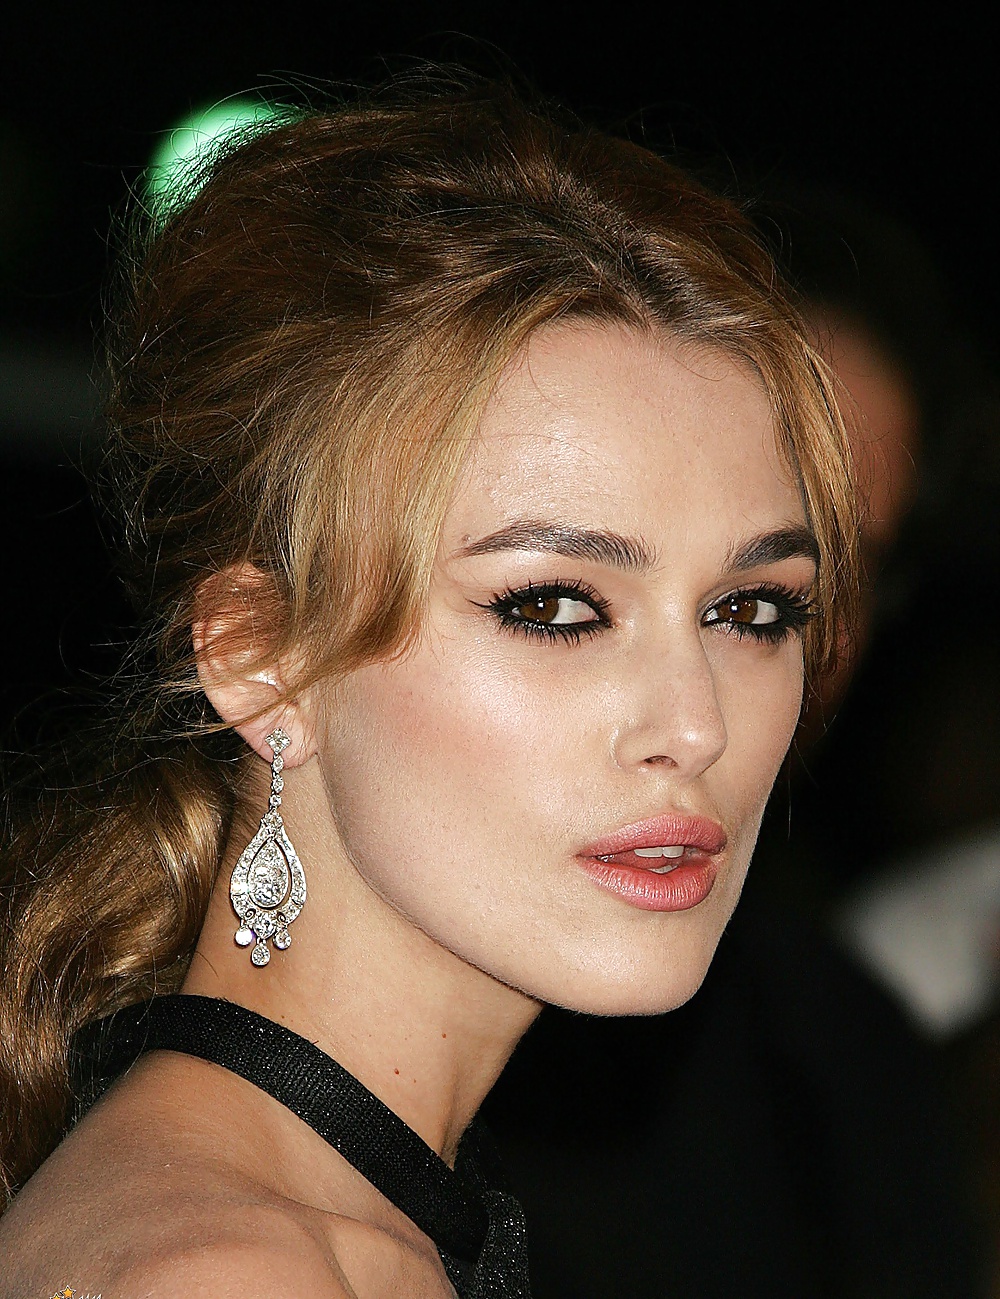 Keira Knightley The Royal Lady of England #35650061